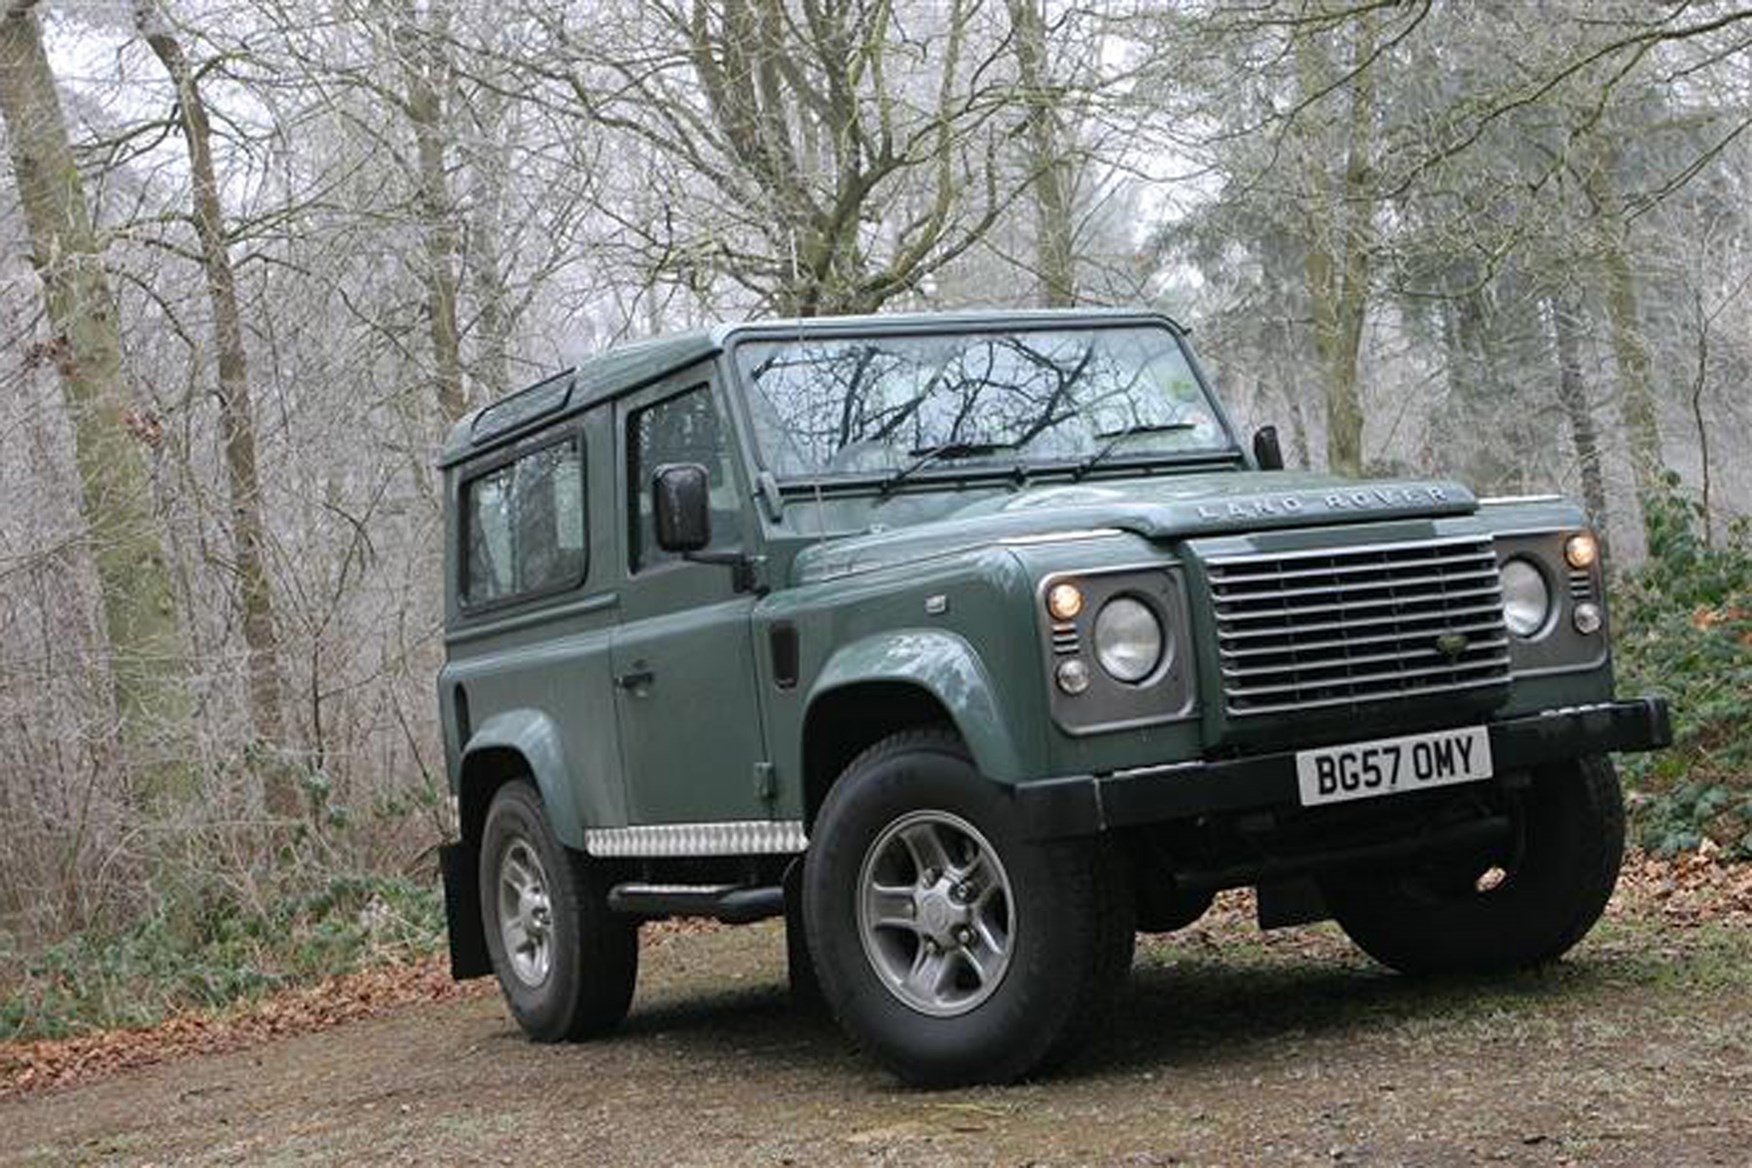 Land Rover Defender 2007-2016 review on Parkers Vans - exterior